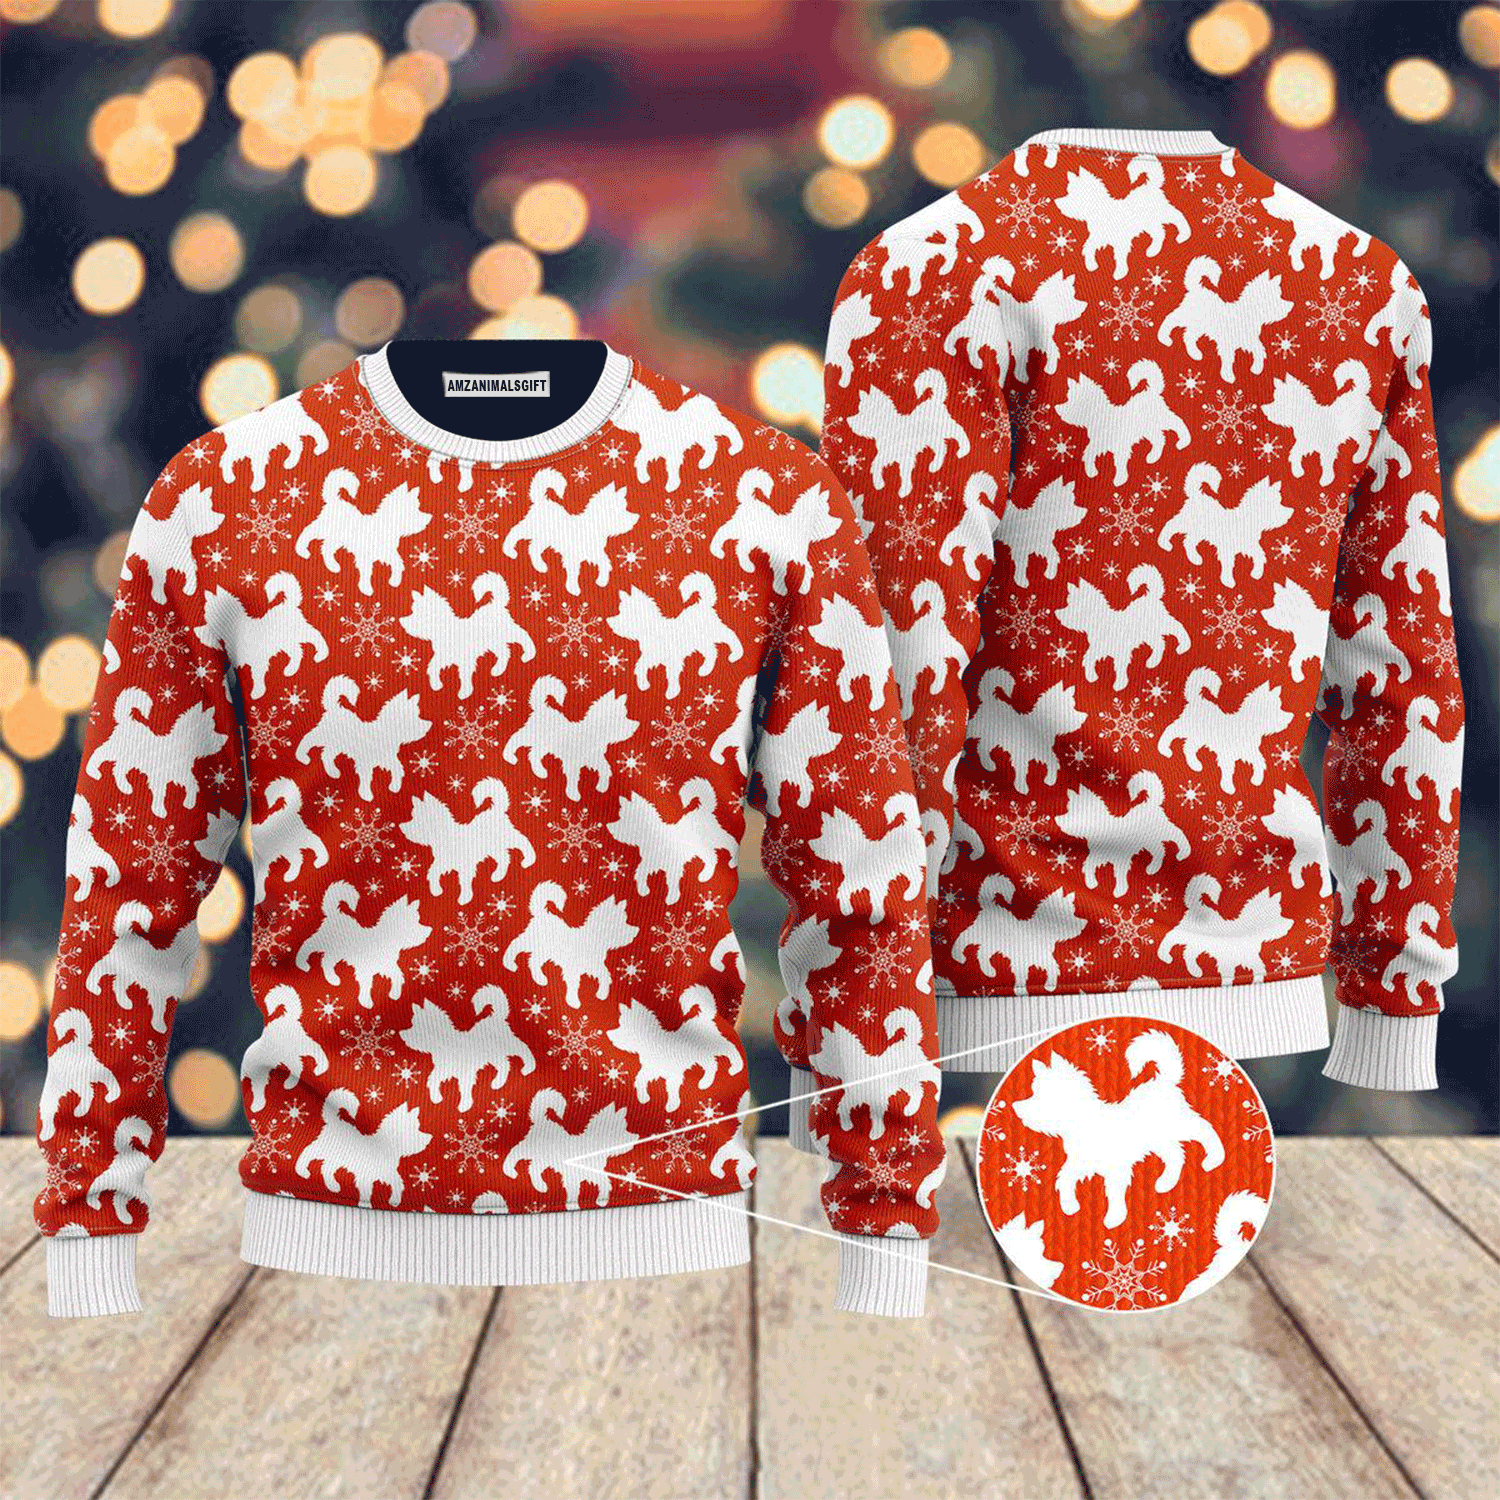 Merry Dogmas Sweater Christmas, Ugly Sweater For Men & Women, Perfect Outfit For Christmas New Year Autumn Winter